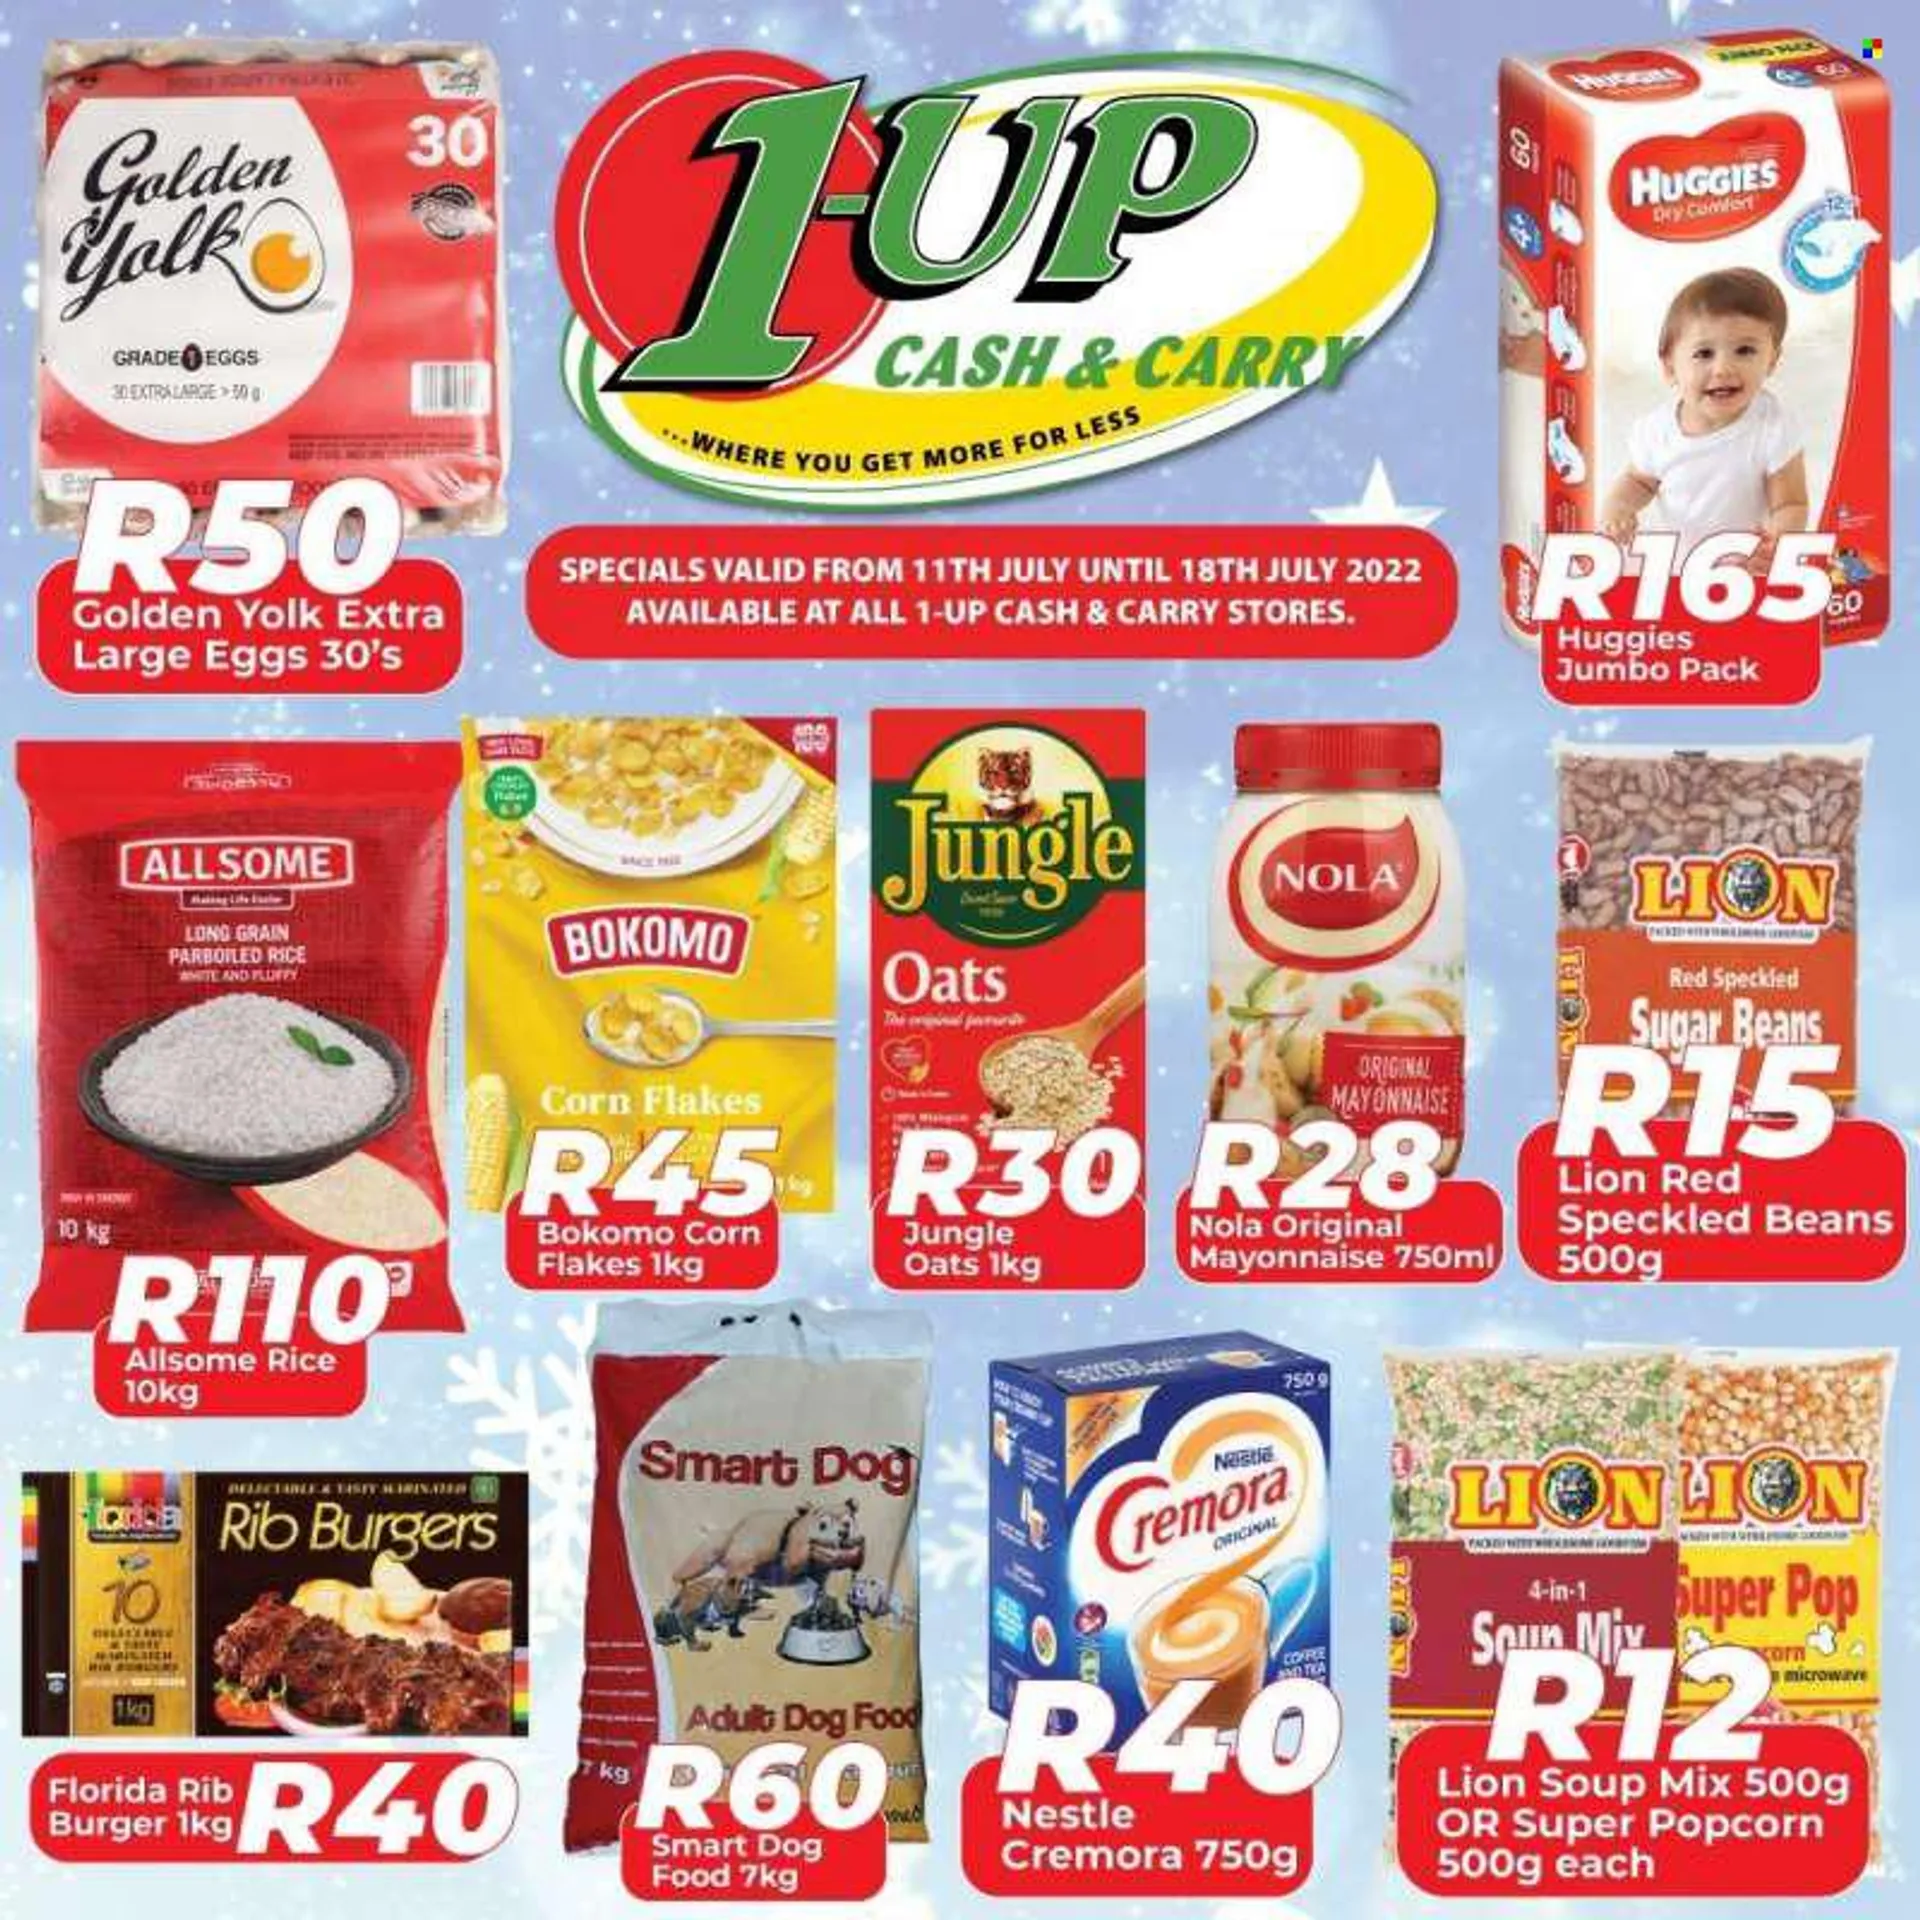 1UP Cash &amp; Carry catalogue  - 11/07/2022 - 18/07/2022 - Sales products - soup mix, soup, hamburger, large eggs, mayonnaise, Nestlé, popcorn, sugar, oats, Cremora, red beans, corn flakes, jungle oats, rice, parboiled rice, tea, coffee, Huggies, animal 